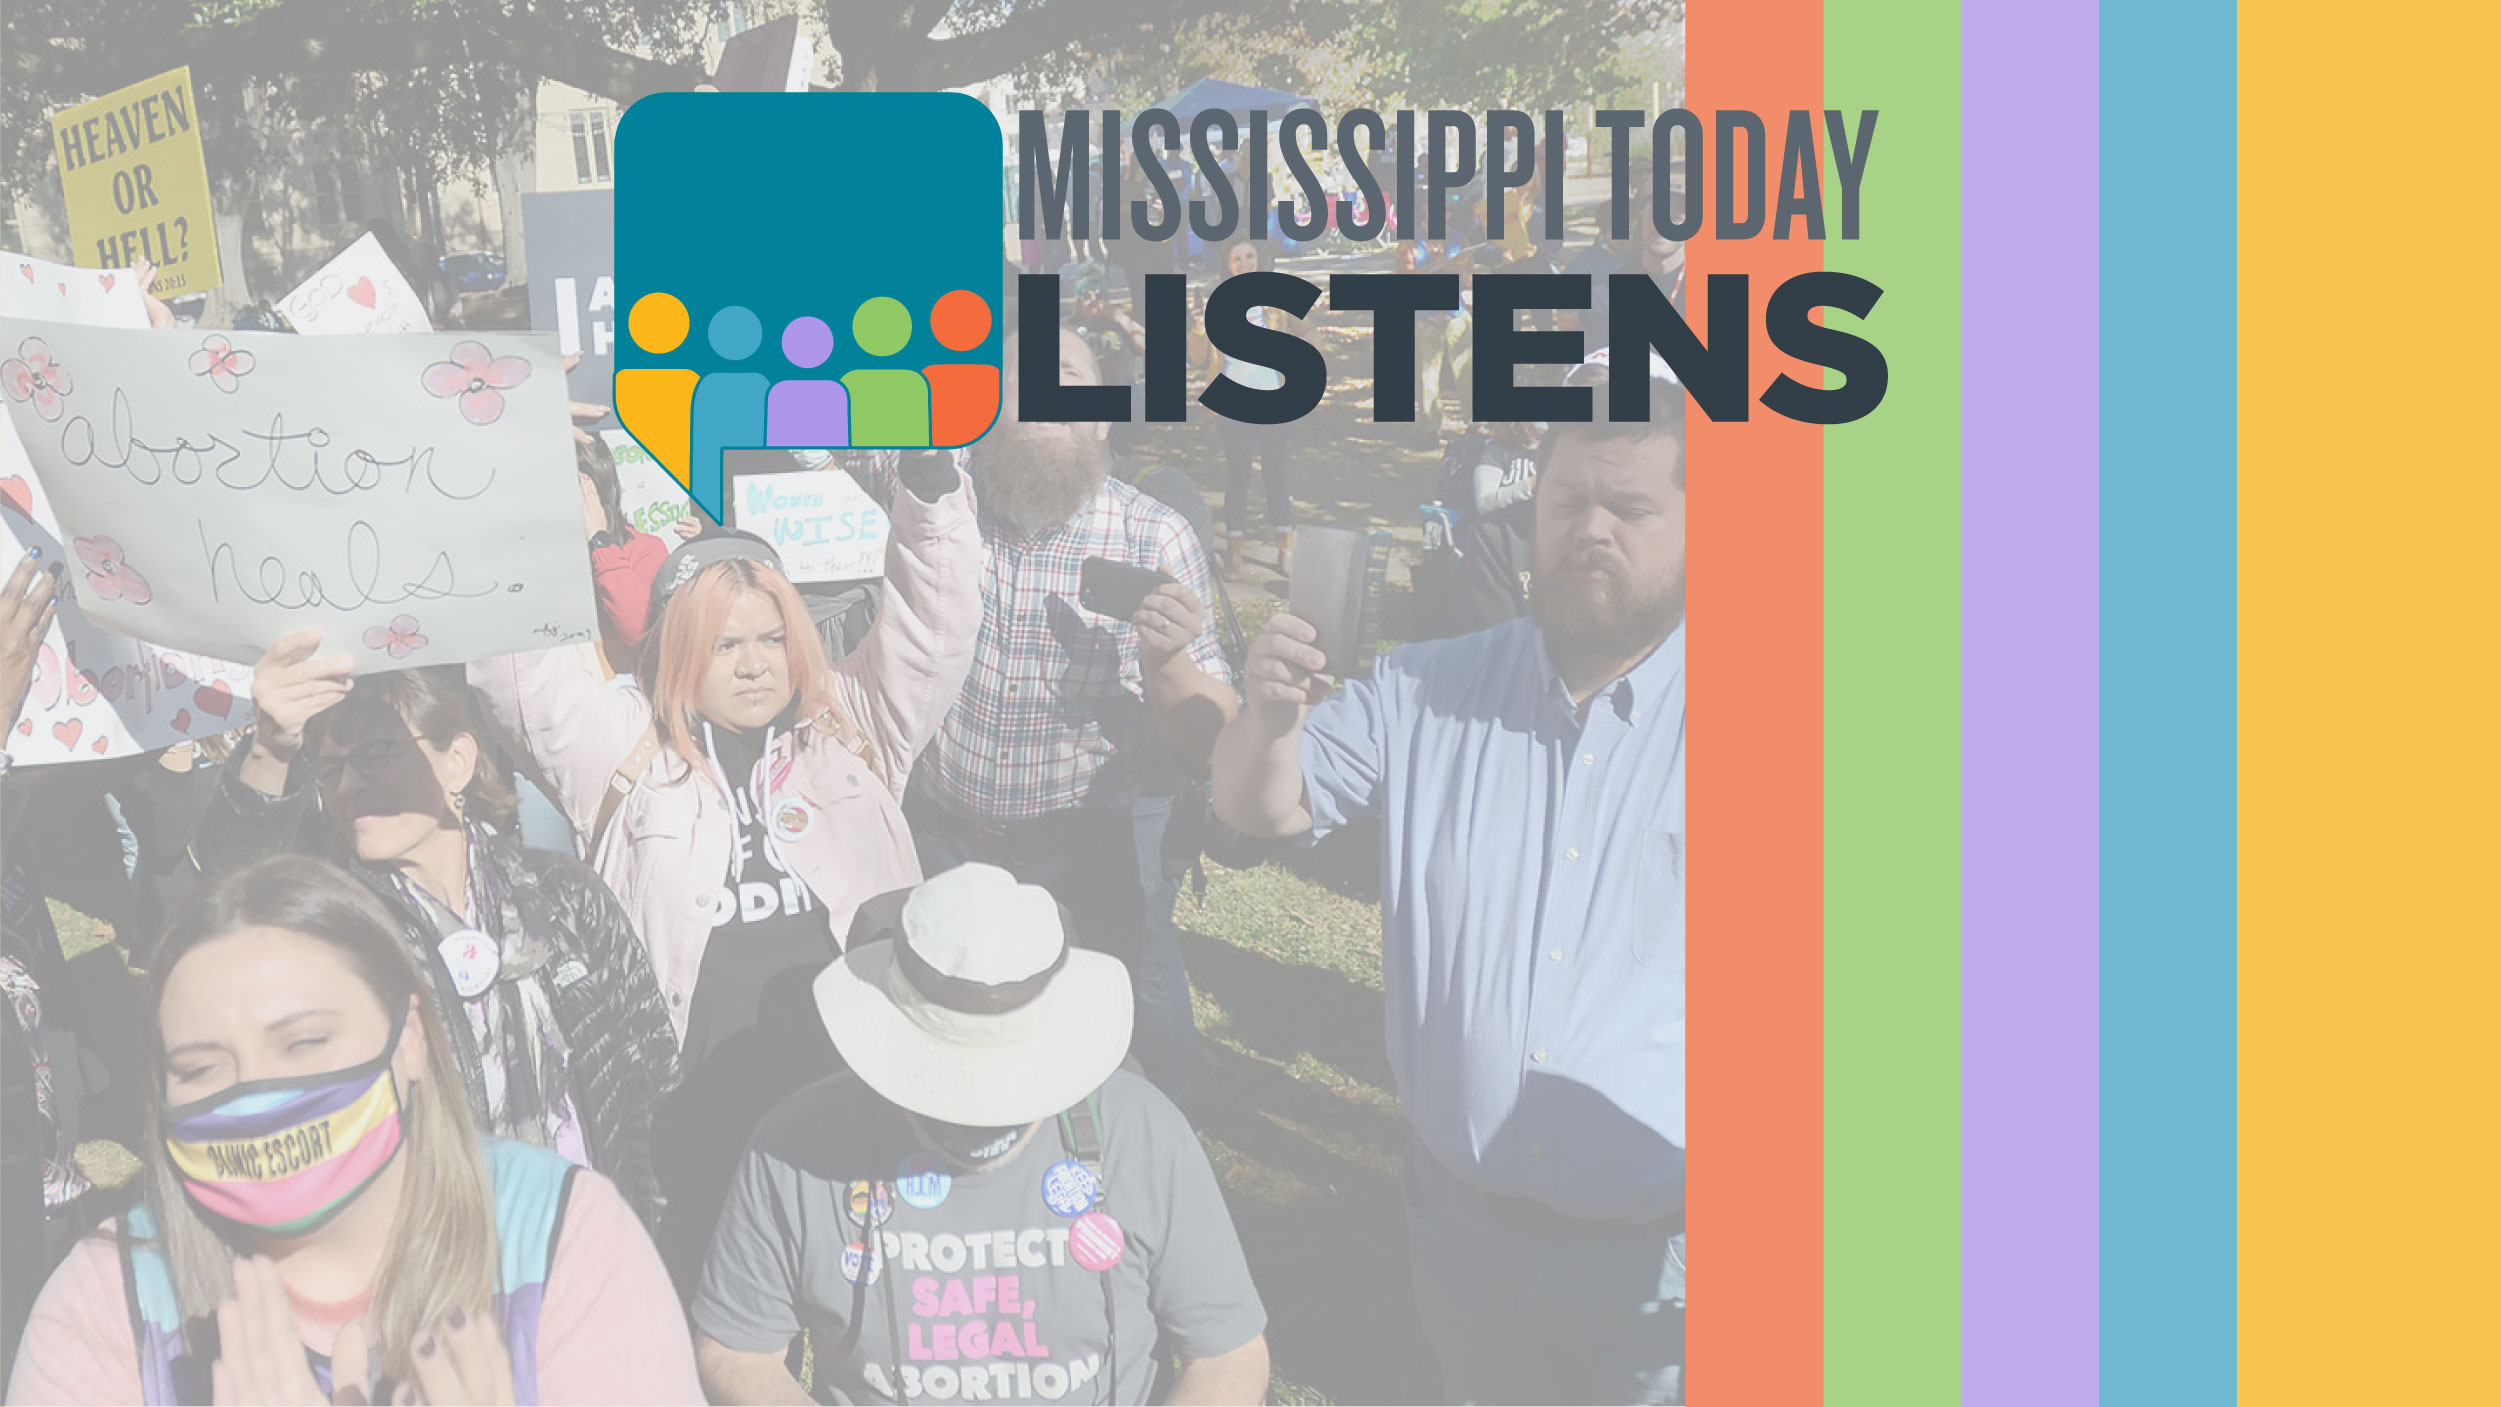 Are you following news around access to abortion in Mississippi?